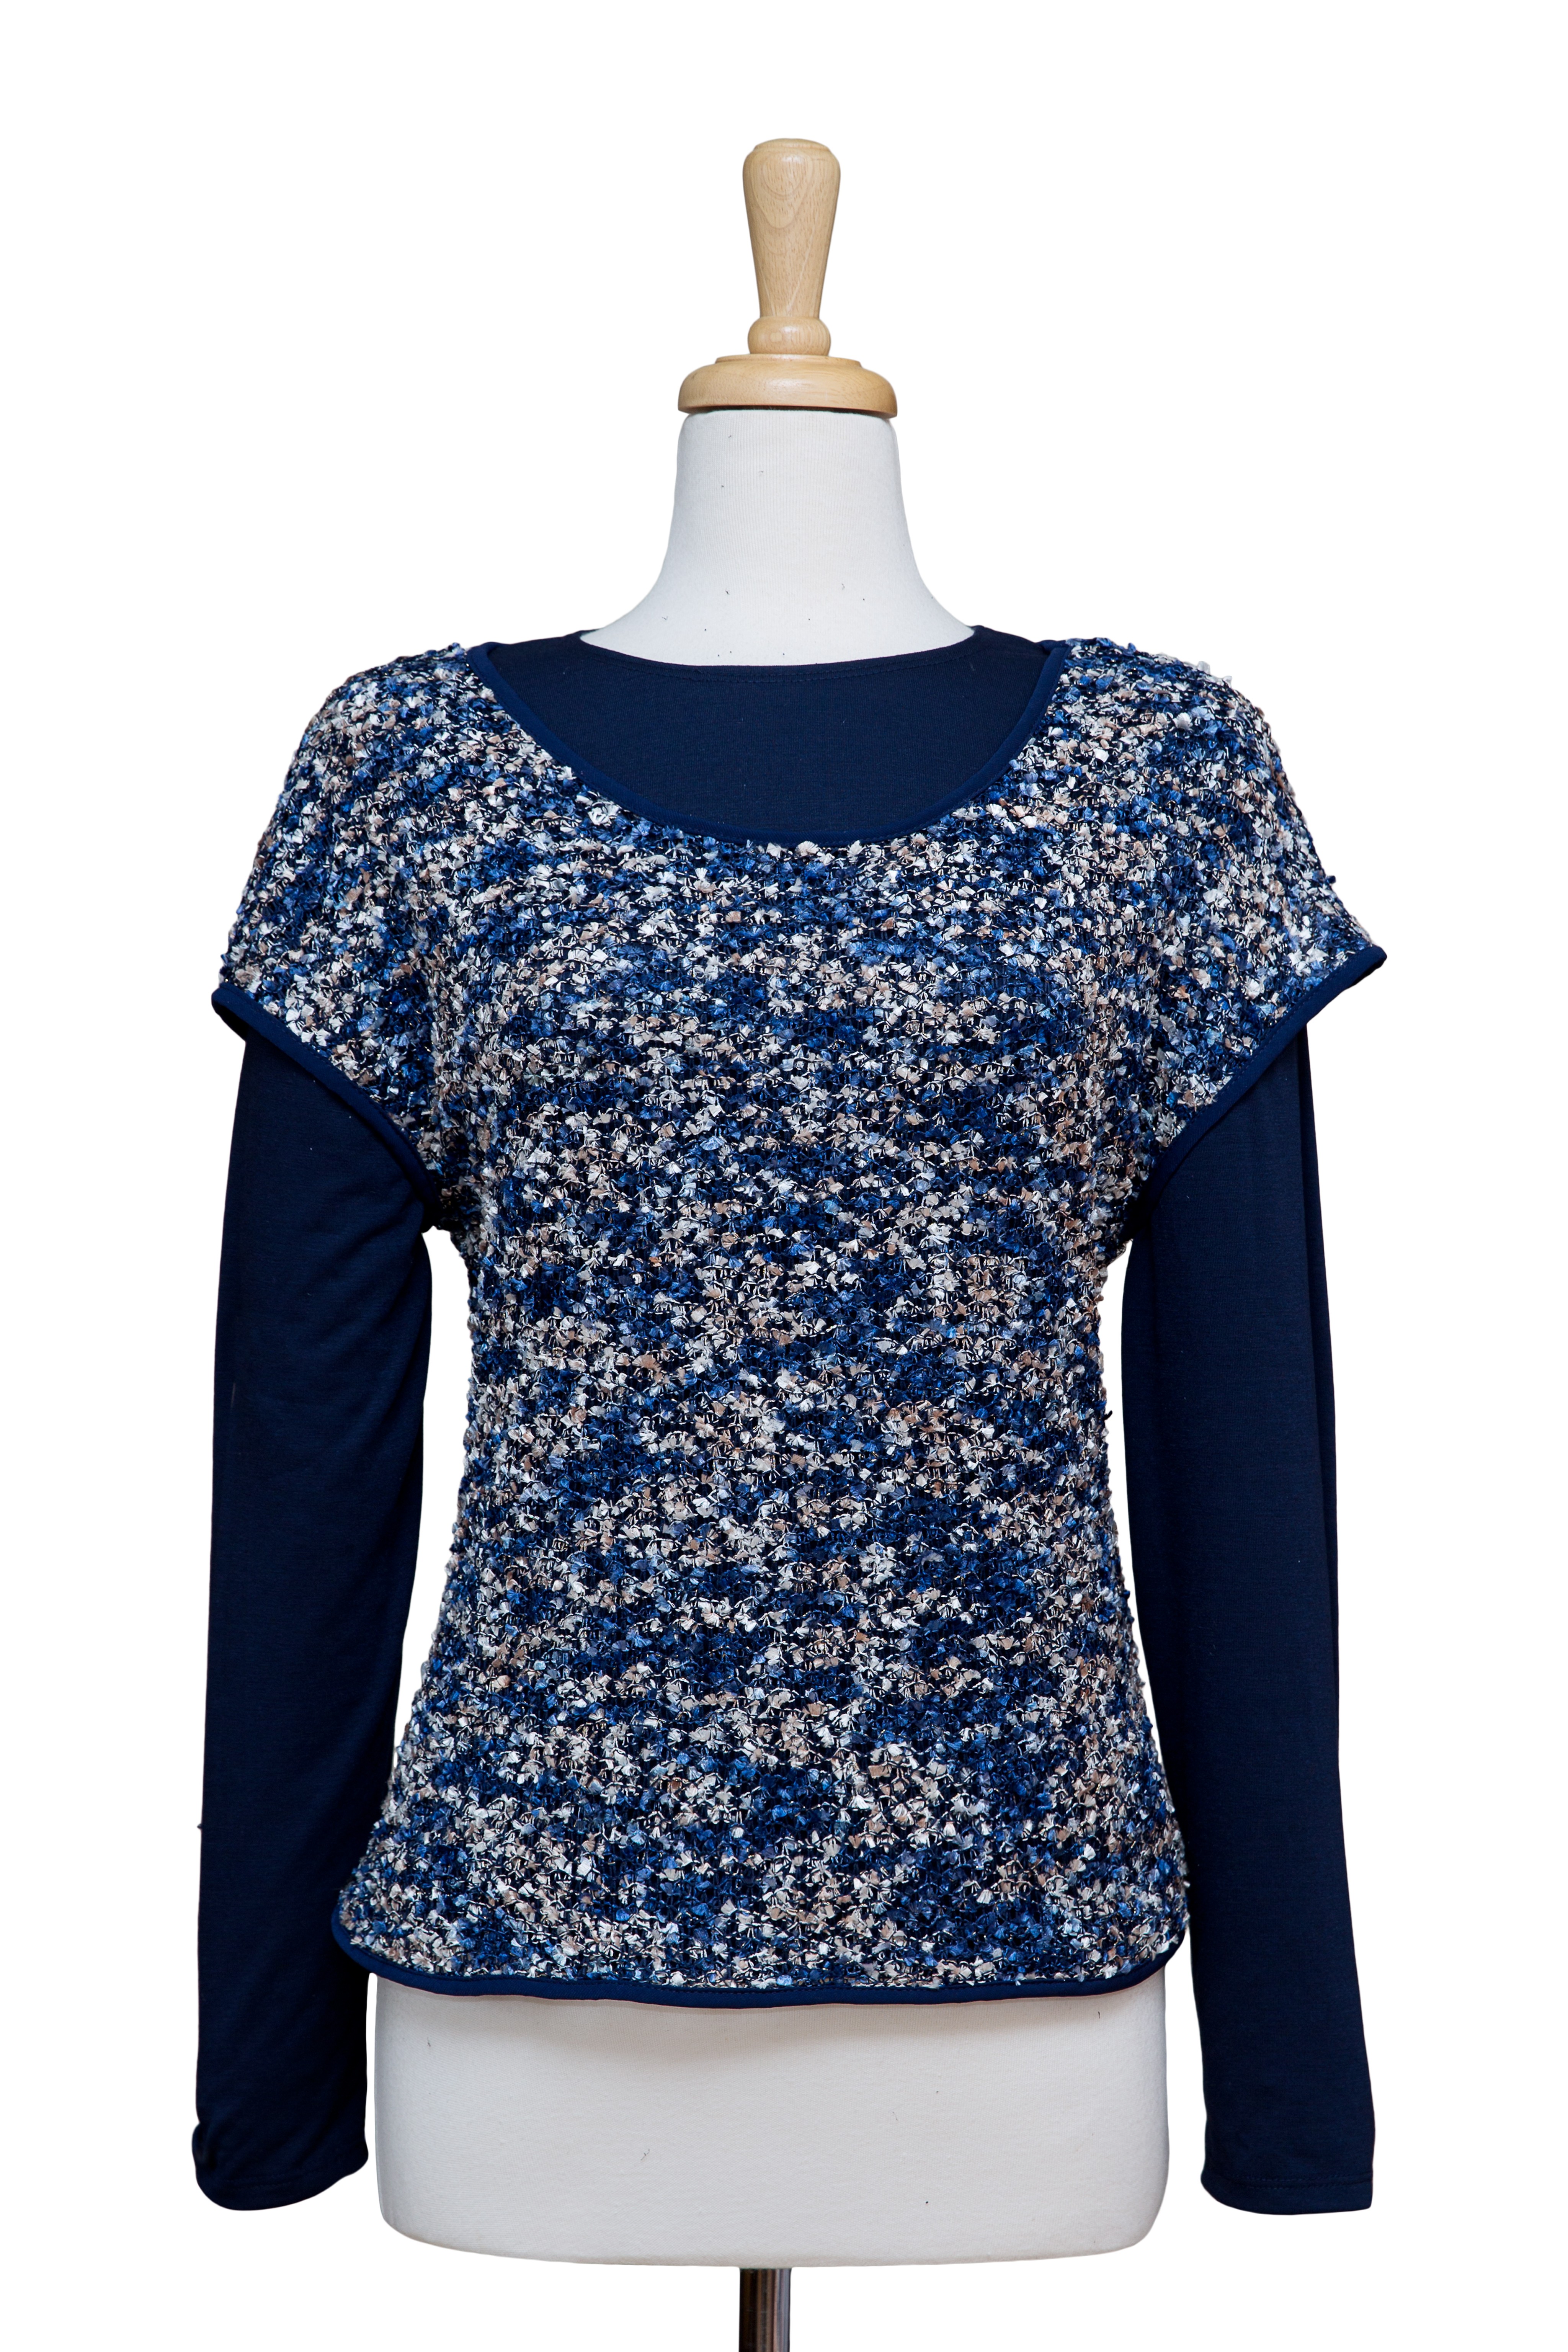 Shades of Blue & Ivory Tweed Knit Short Sleeve Top With Navy Long Sleeve Top